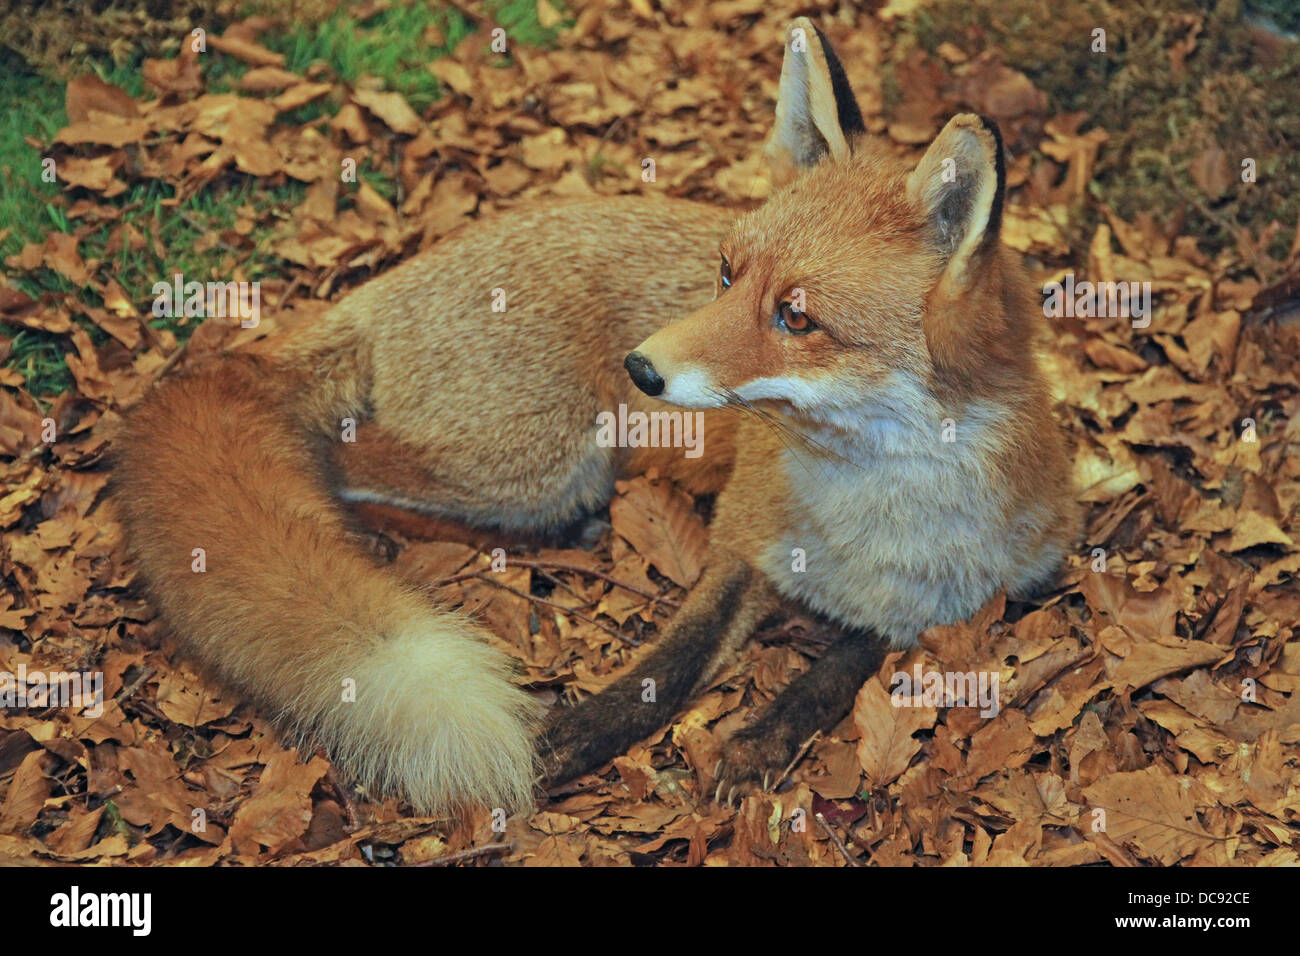 young specimen of Fox while resting lying in the middle of the leaves in autumn 1 Stock Photo